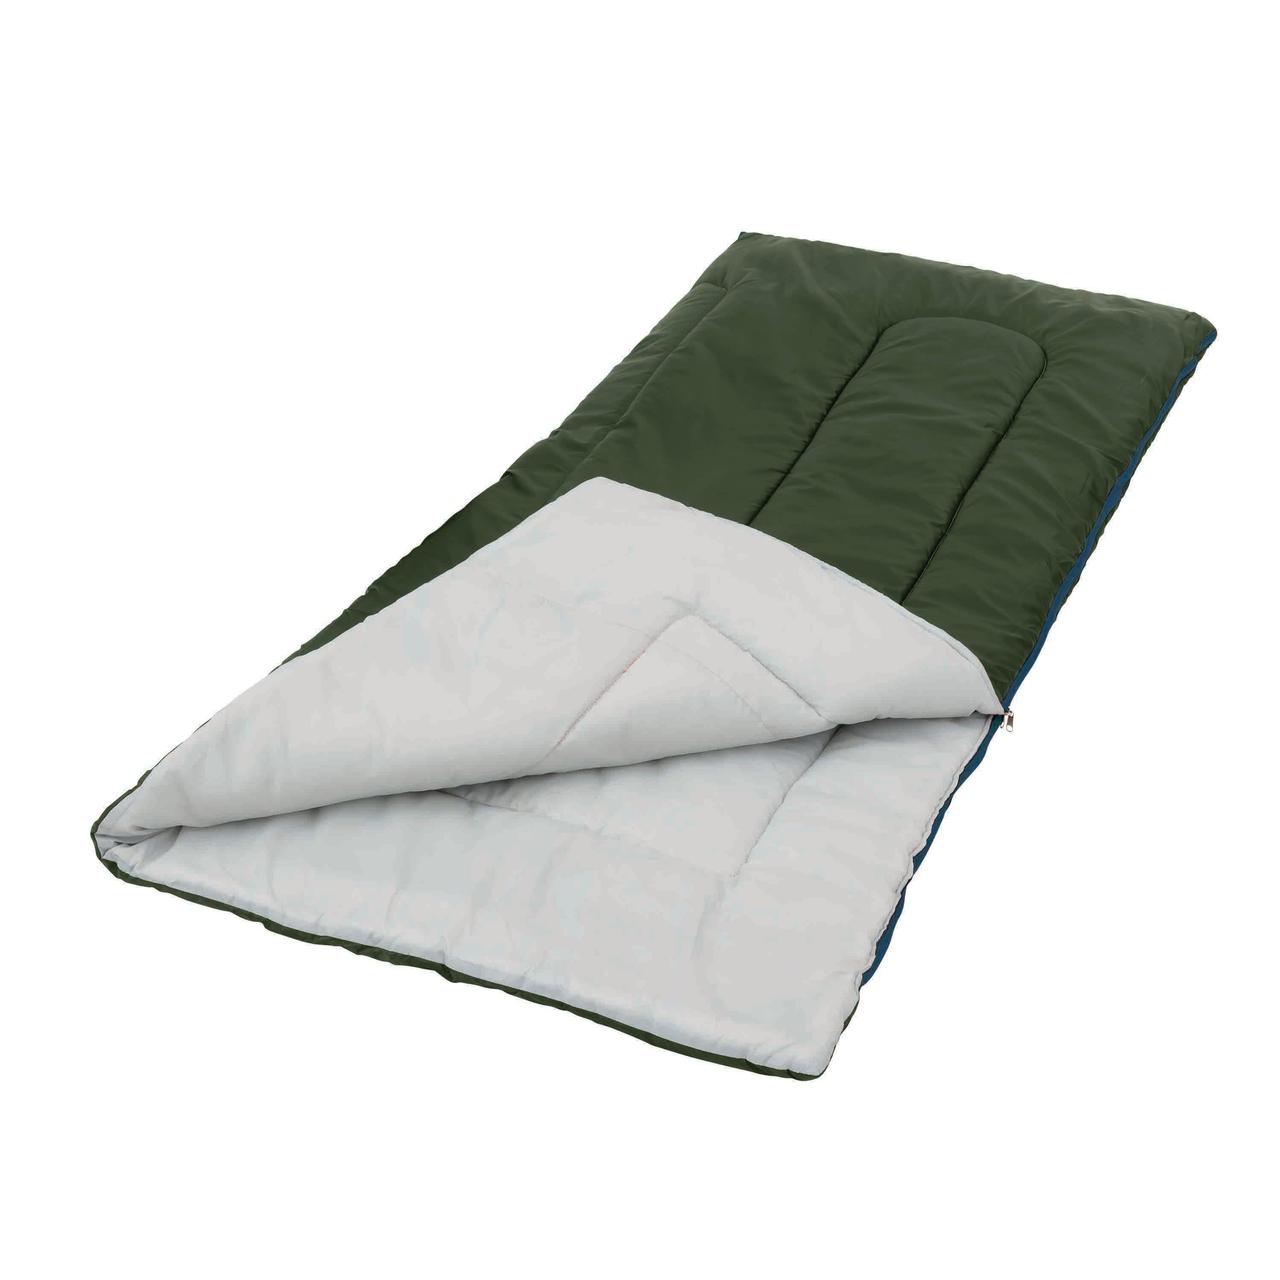 Ozark Trail 6-Piece Camping Combo -Green (Includes tent, chairs, sleeping bags, and table) - image 4 of 8